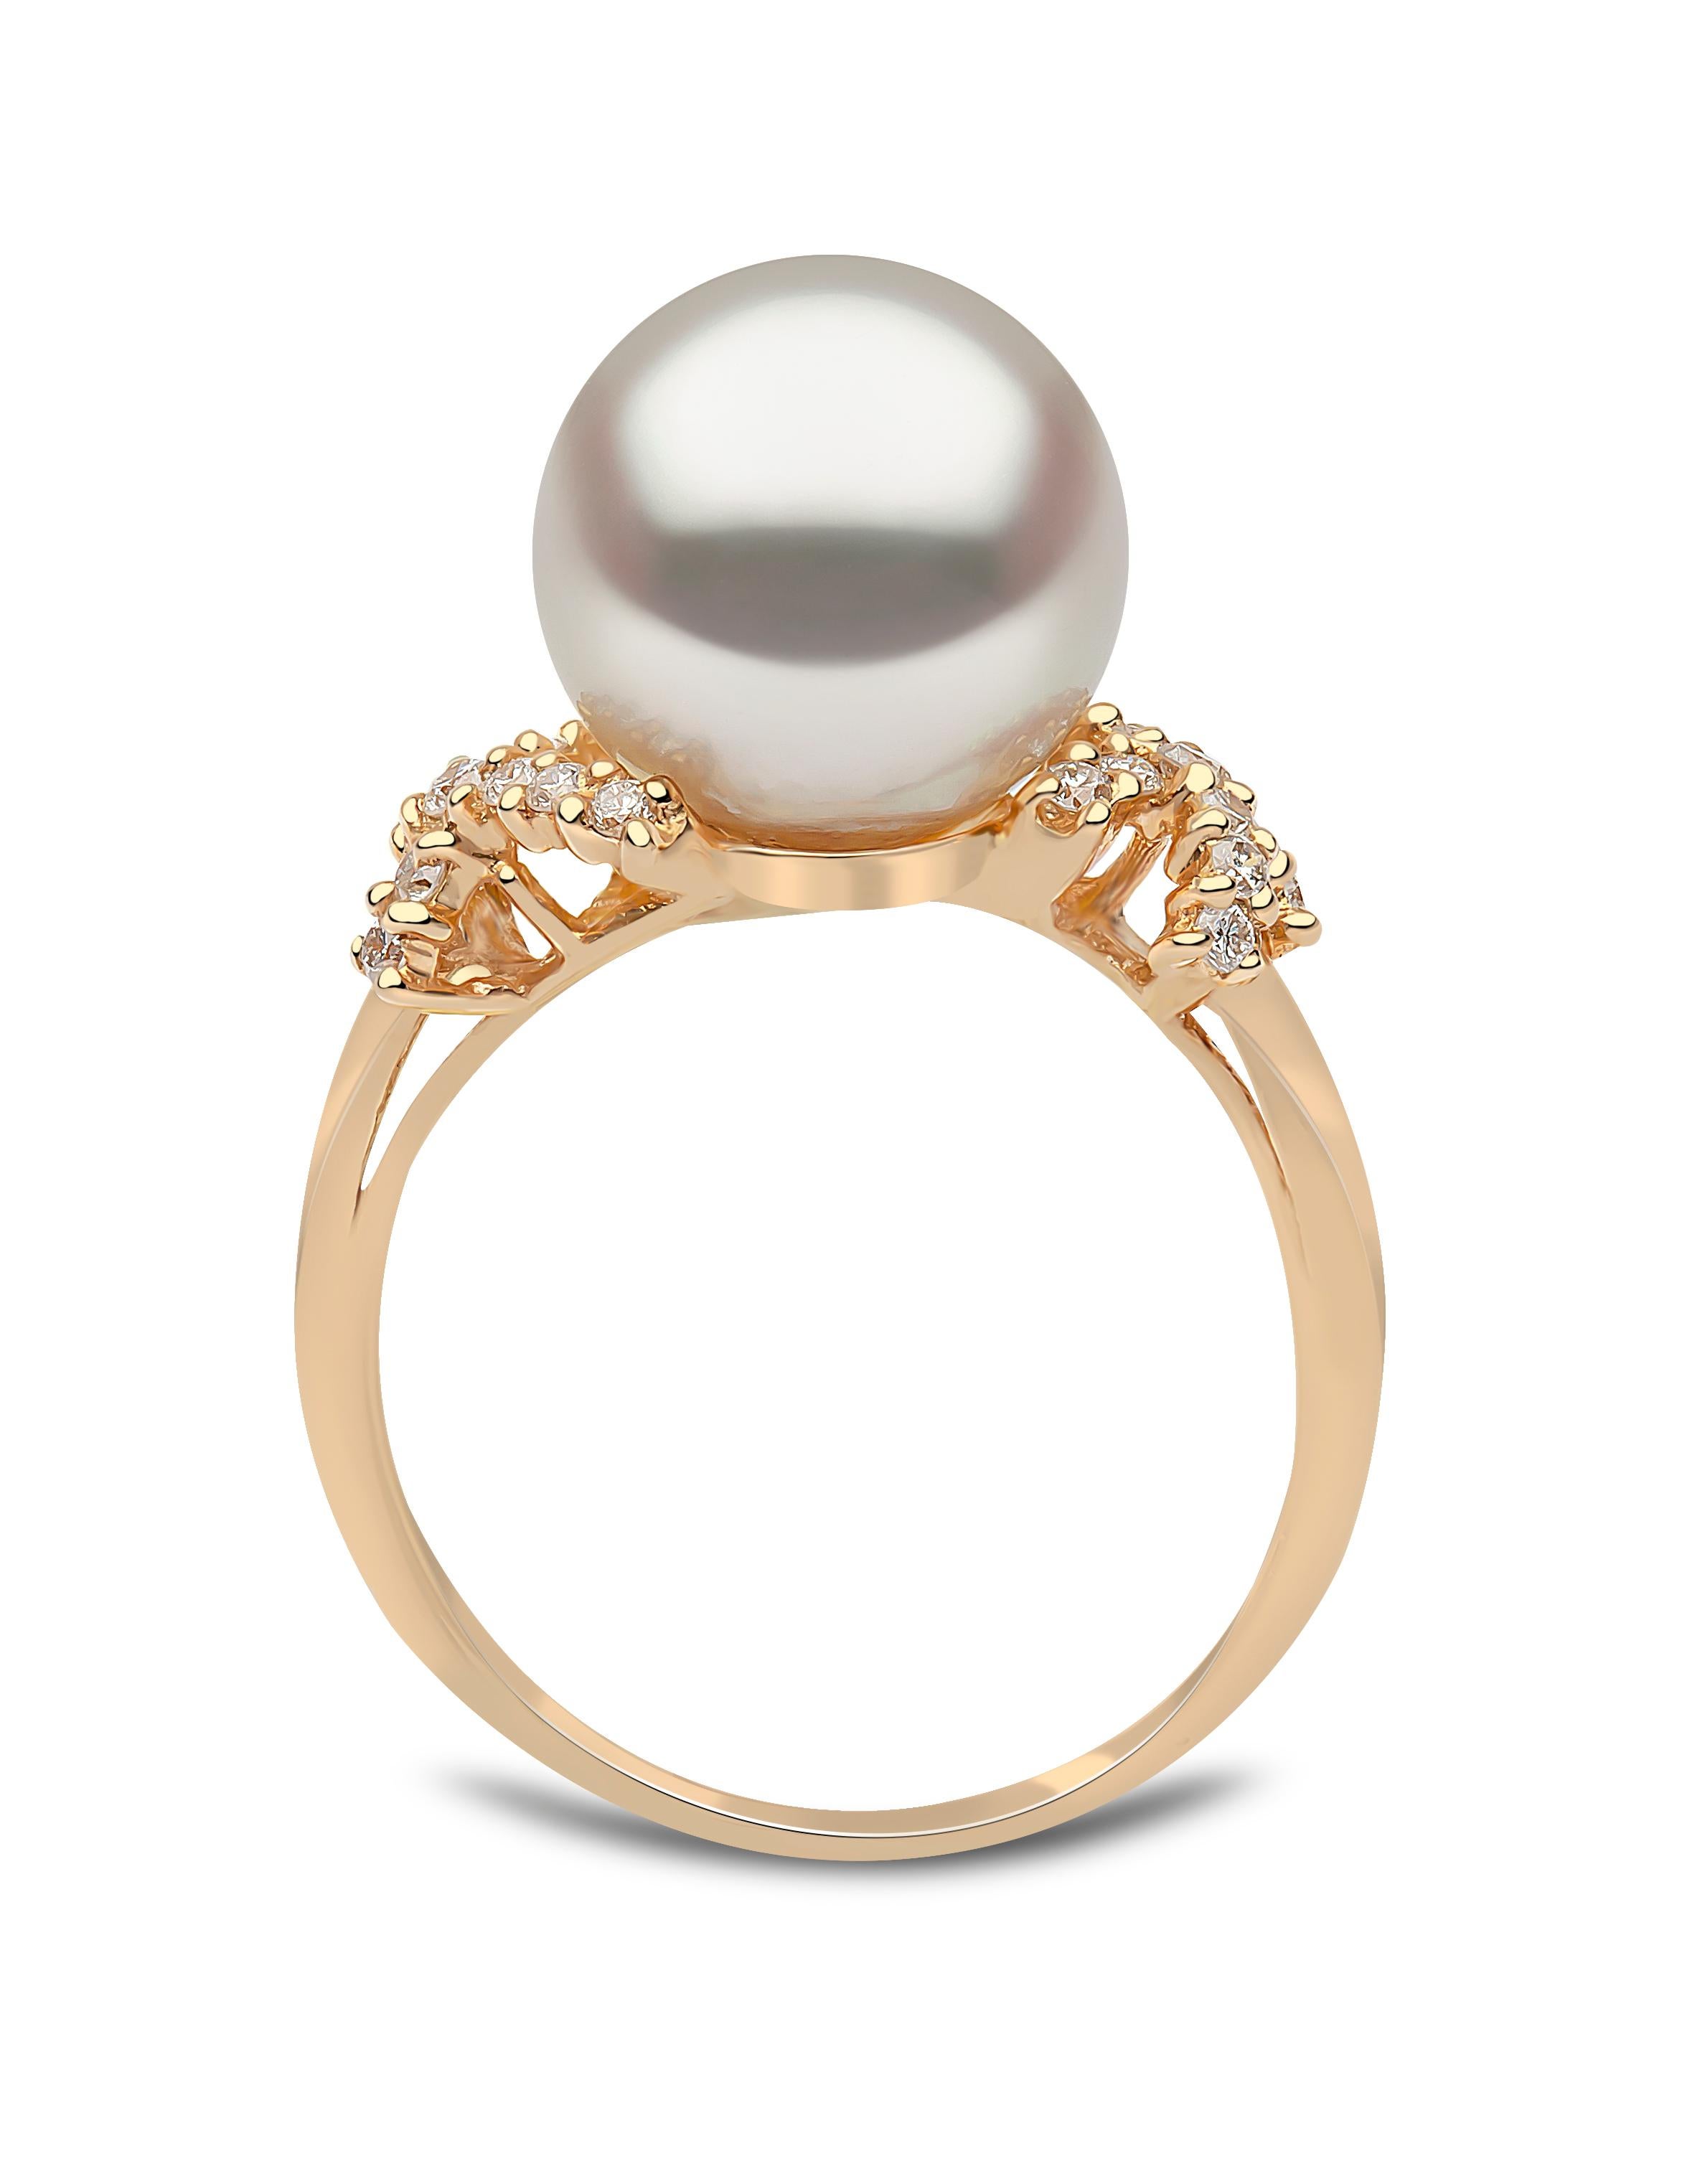 This graceful ring by Yoko London features a lustrous South Sea pearl set between two diamond ‘kisses’. The 18 Karat Yellow Gold setting enriches the radiance of the South Sea pearl and the white sparkle of the diamonds. This ring holds romantic